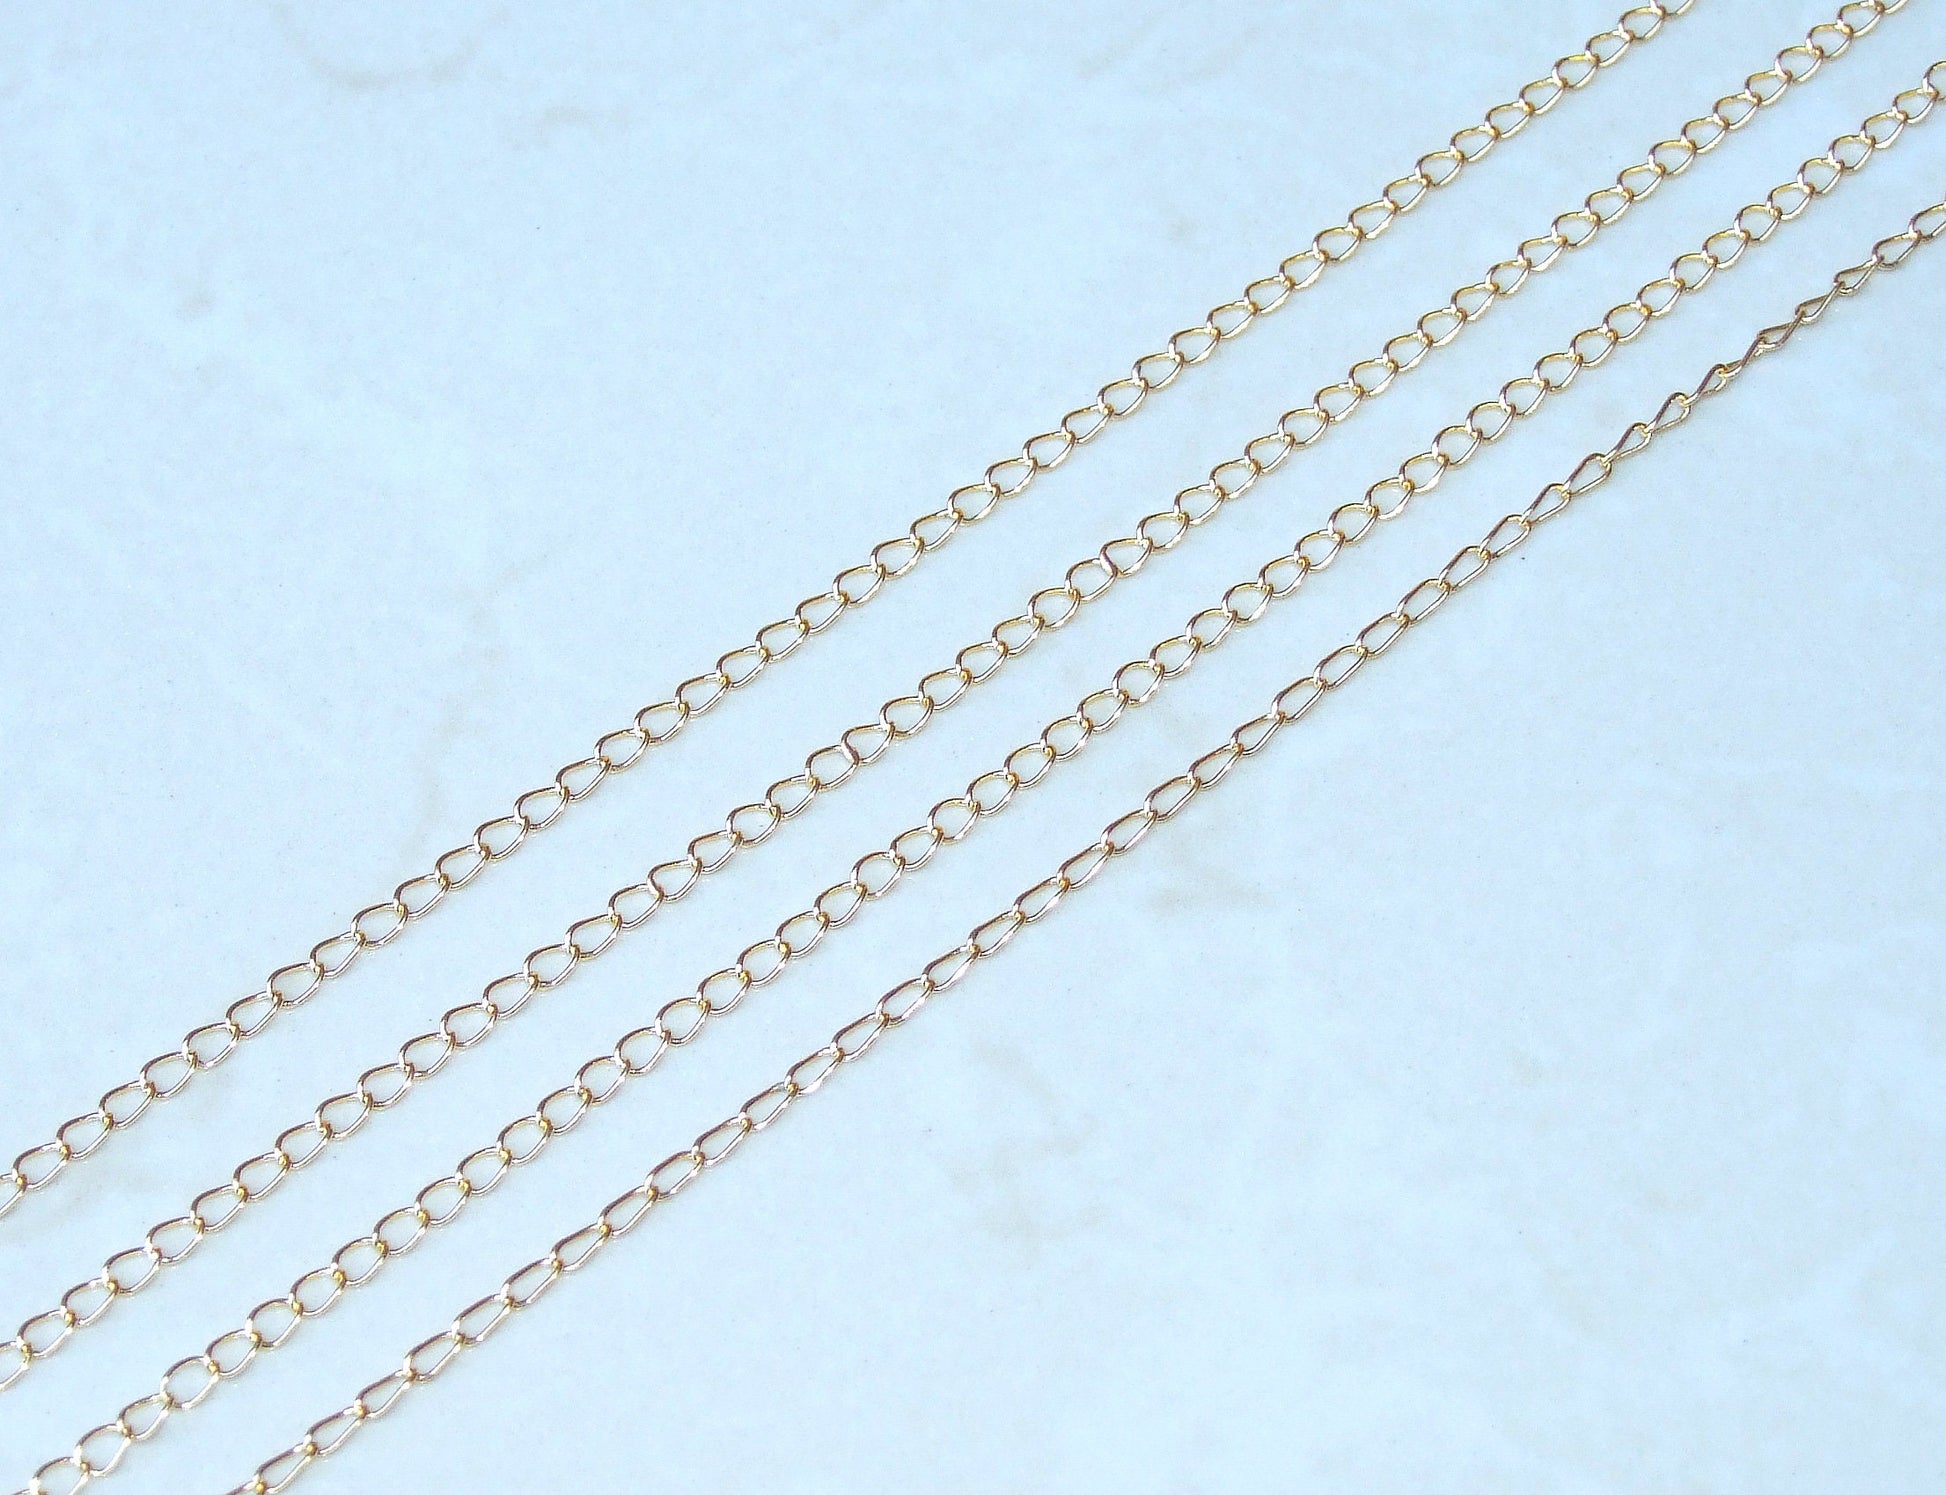 Twisted Oval Link Thin Curb Chain, Gold Plated, Brass Chain, Jewelry Chain, Necklace Chain, Body Chain, Bulk Chain, 5mm x 4mm - 54mm-G